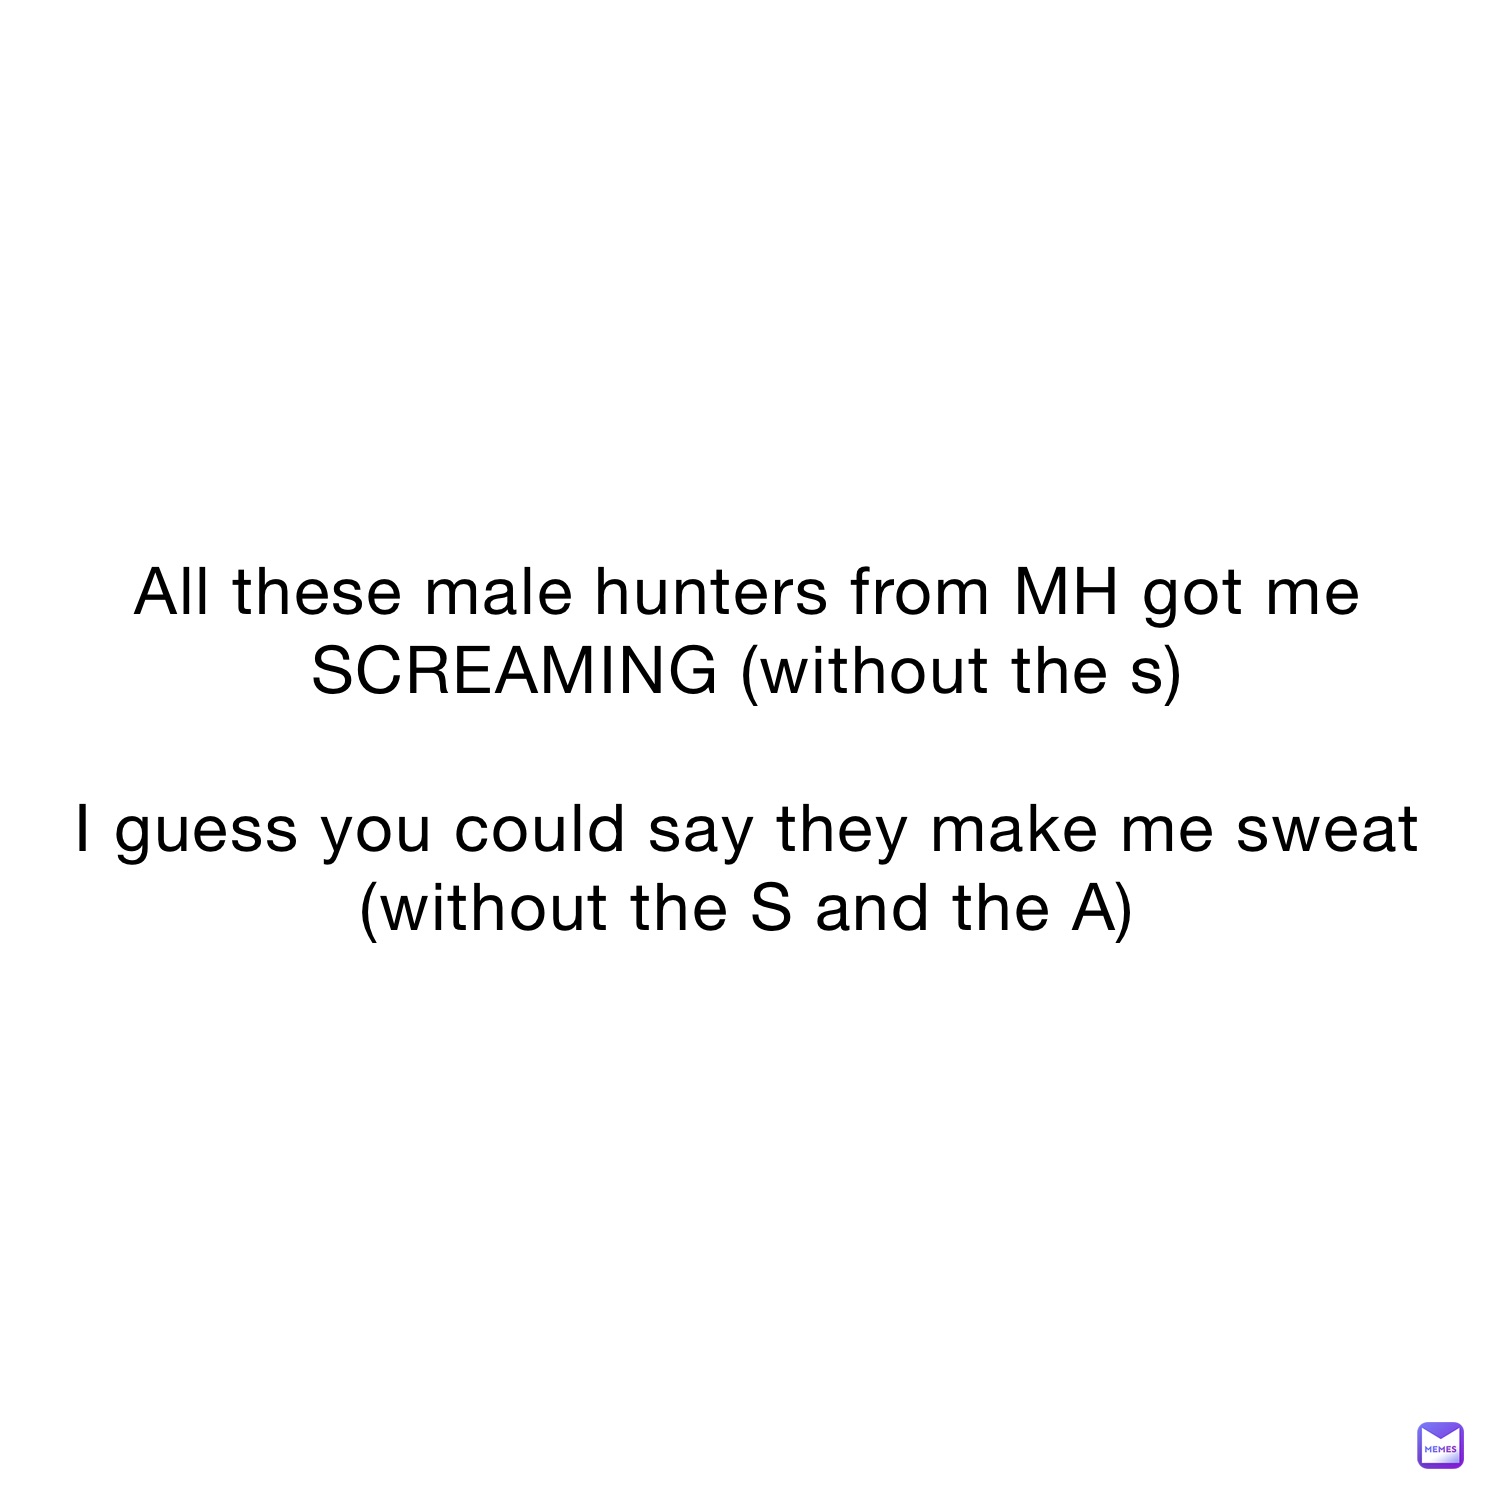 All these male hunters from MH got me SCREAMING (without the s)

I guess you could say they make me sweat (without the S and the A)